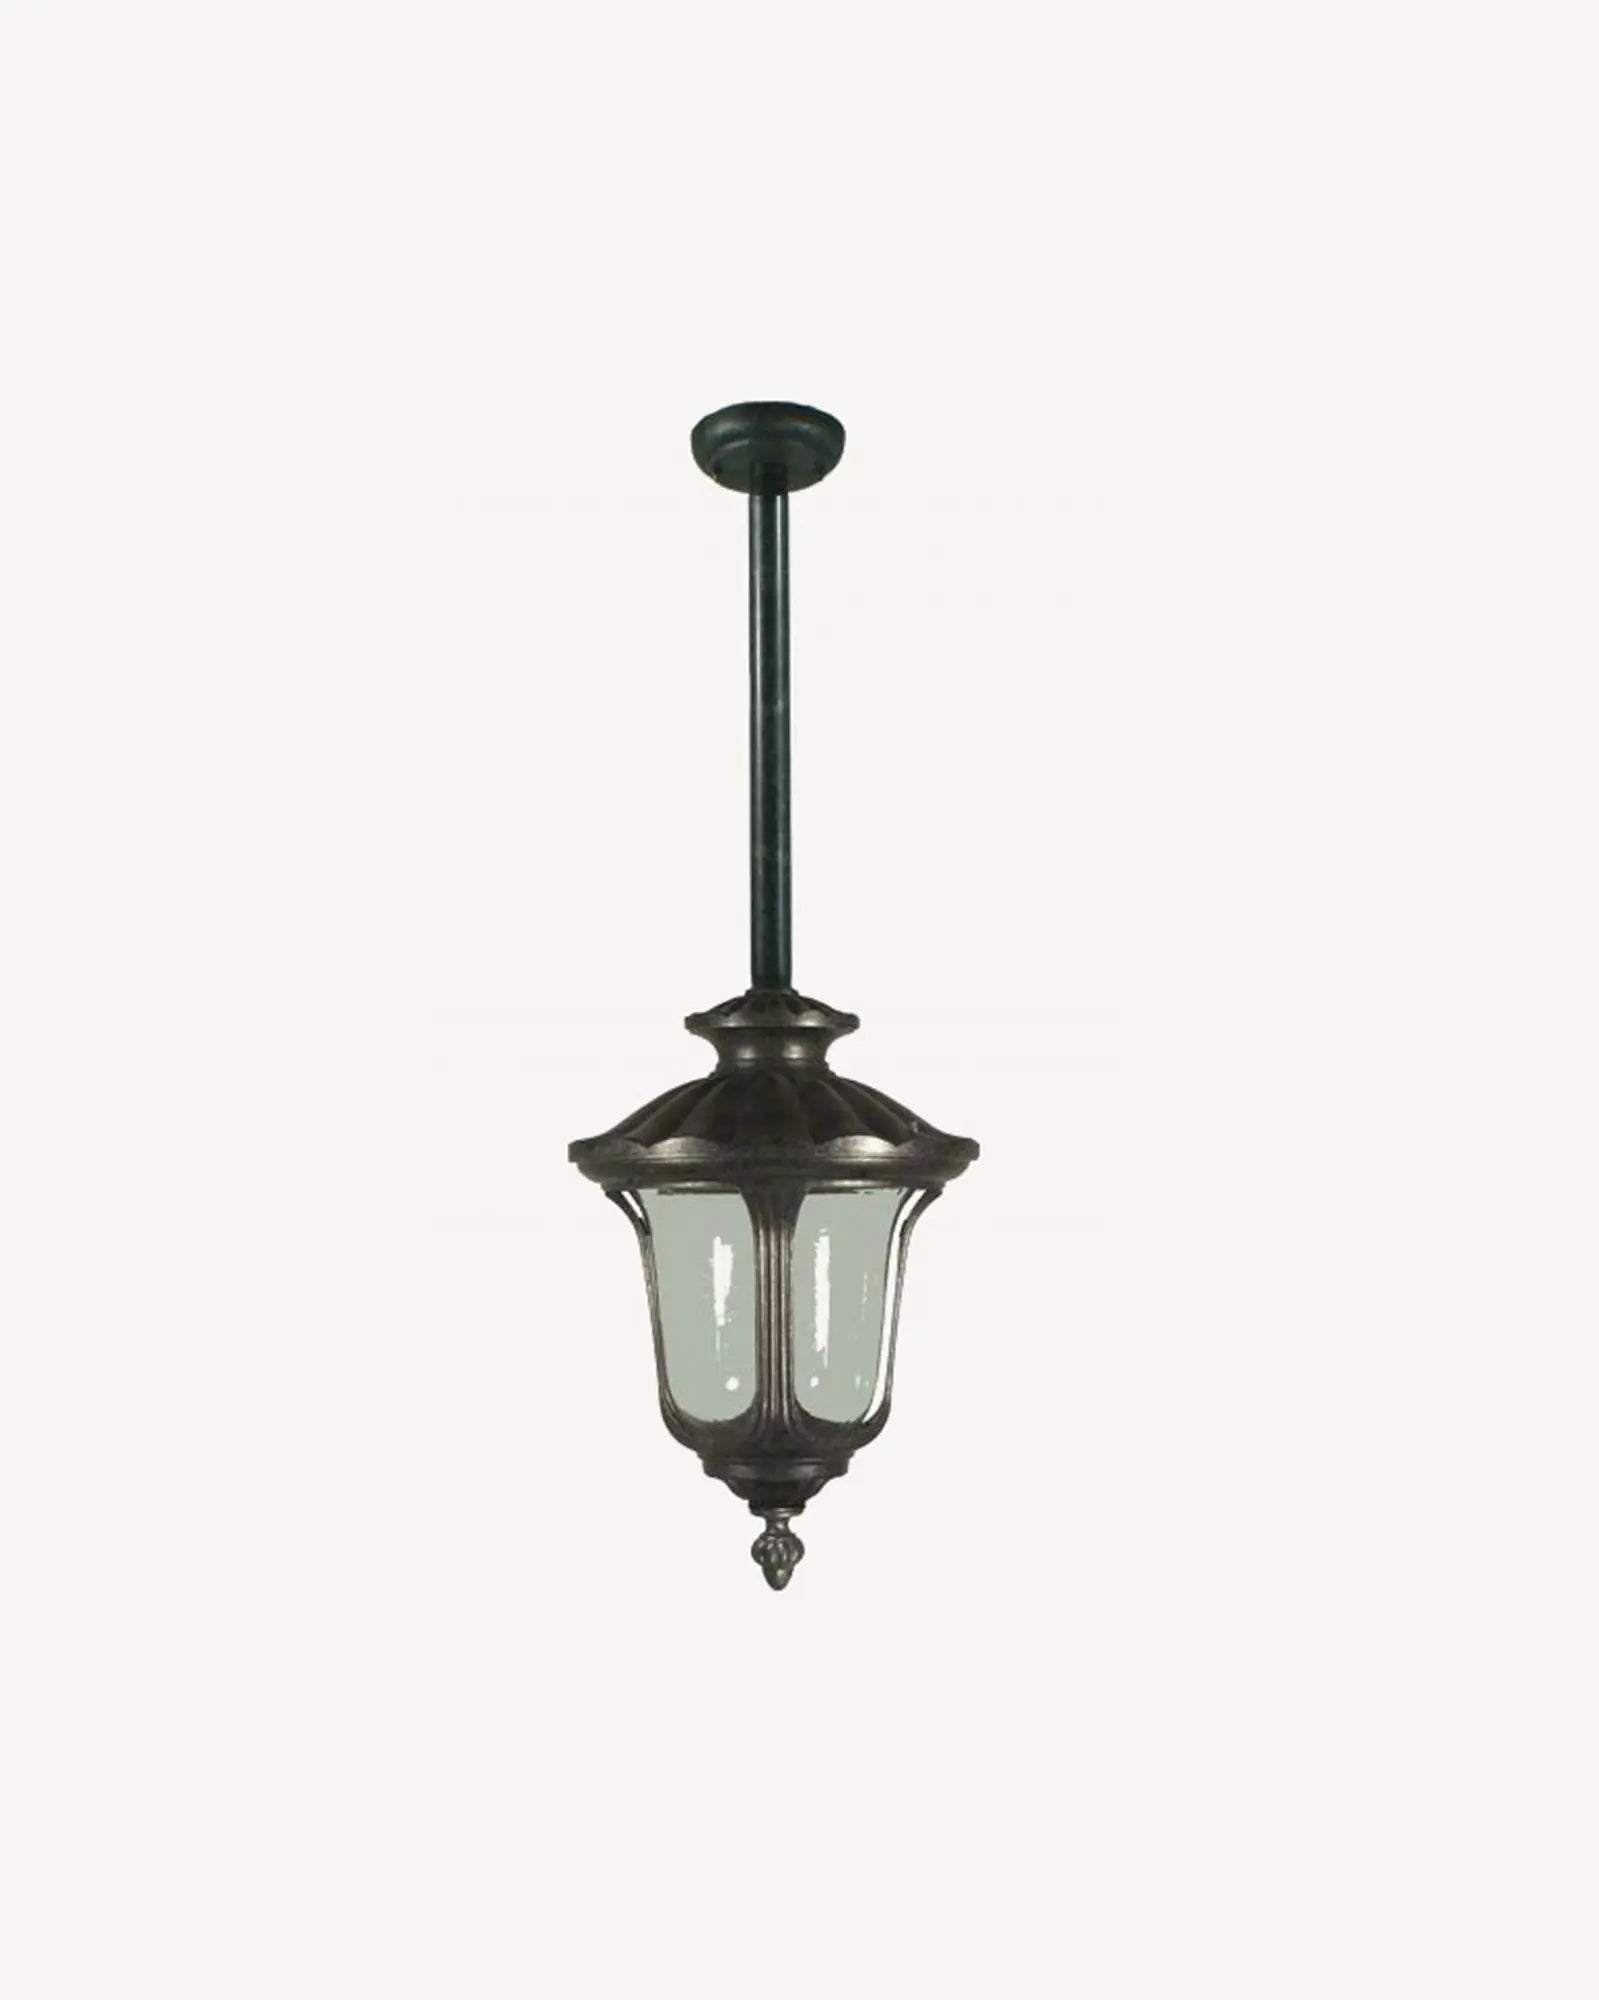 Waterford Rod outdoor pendant light by Inspiration Light at Nook Collections